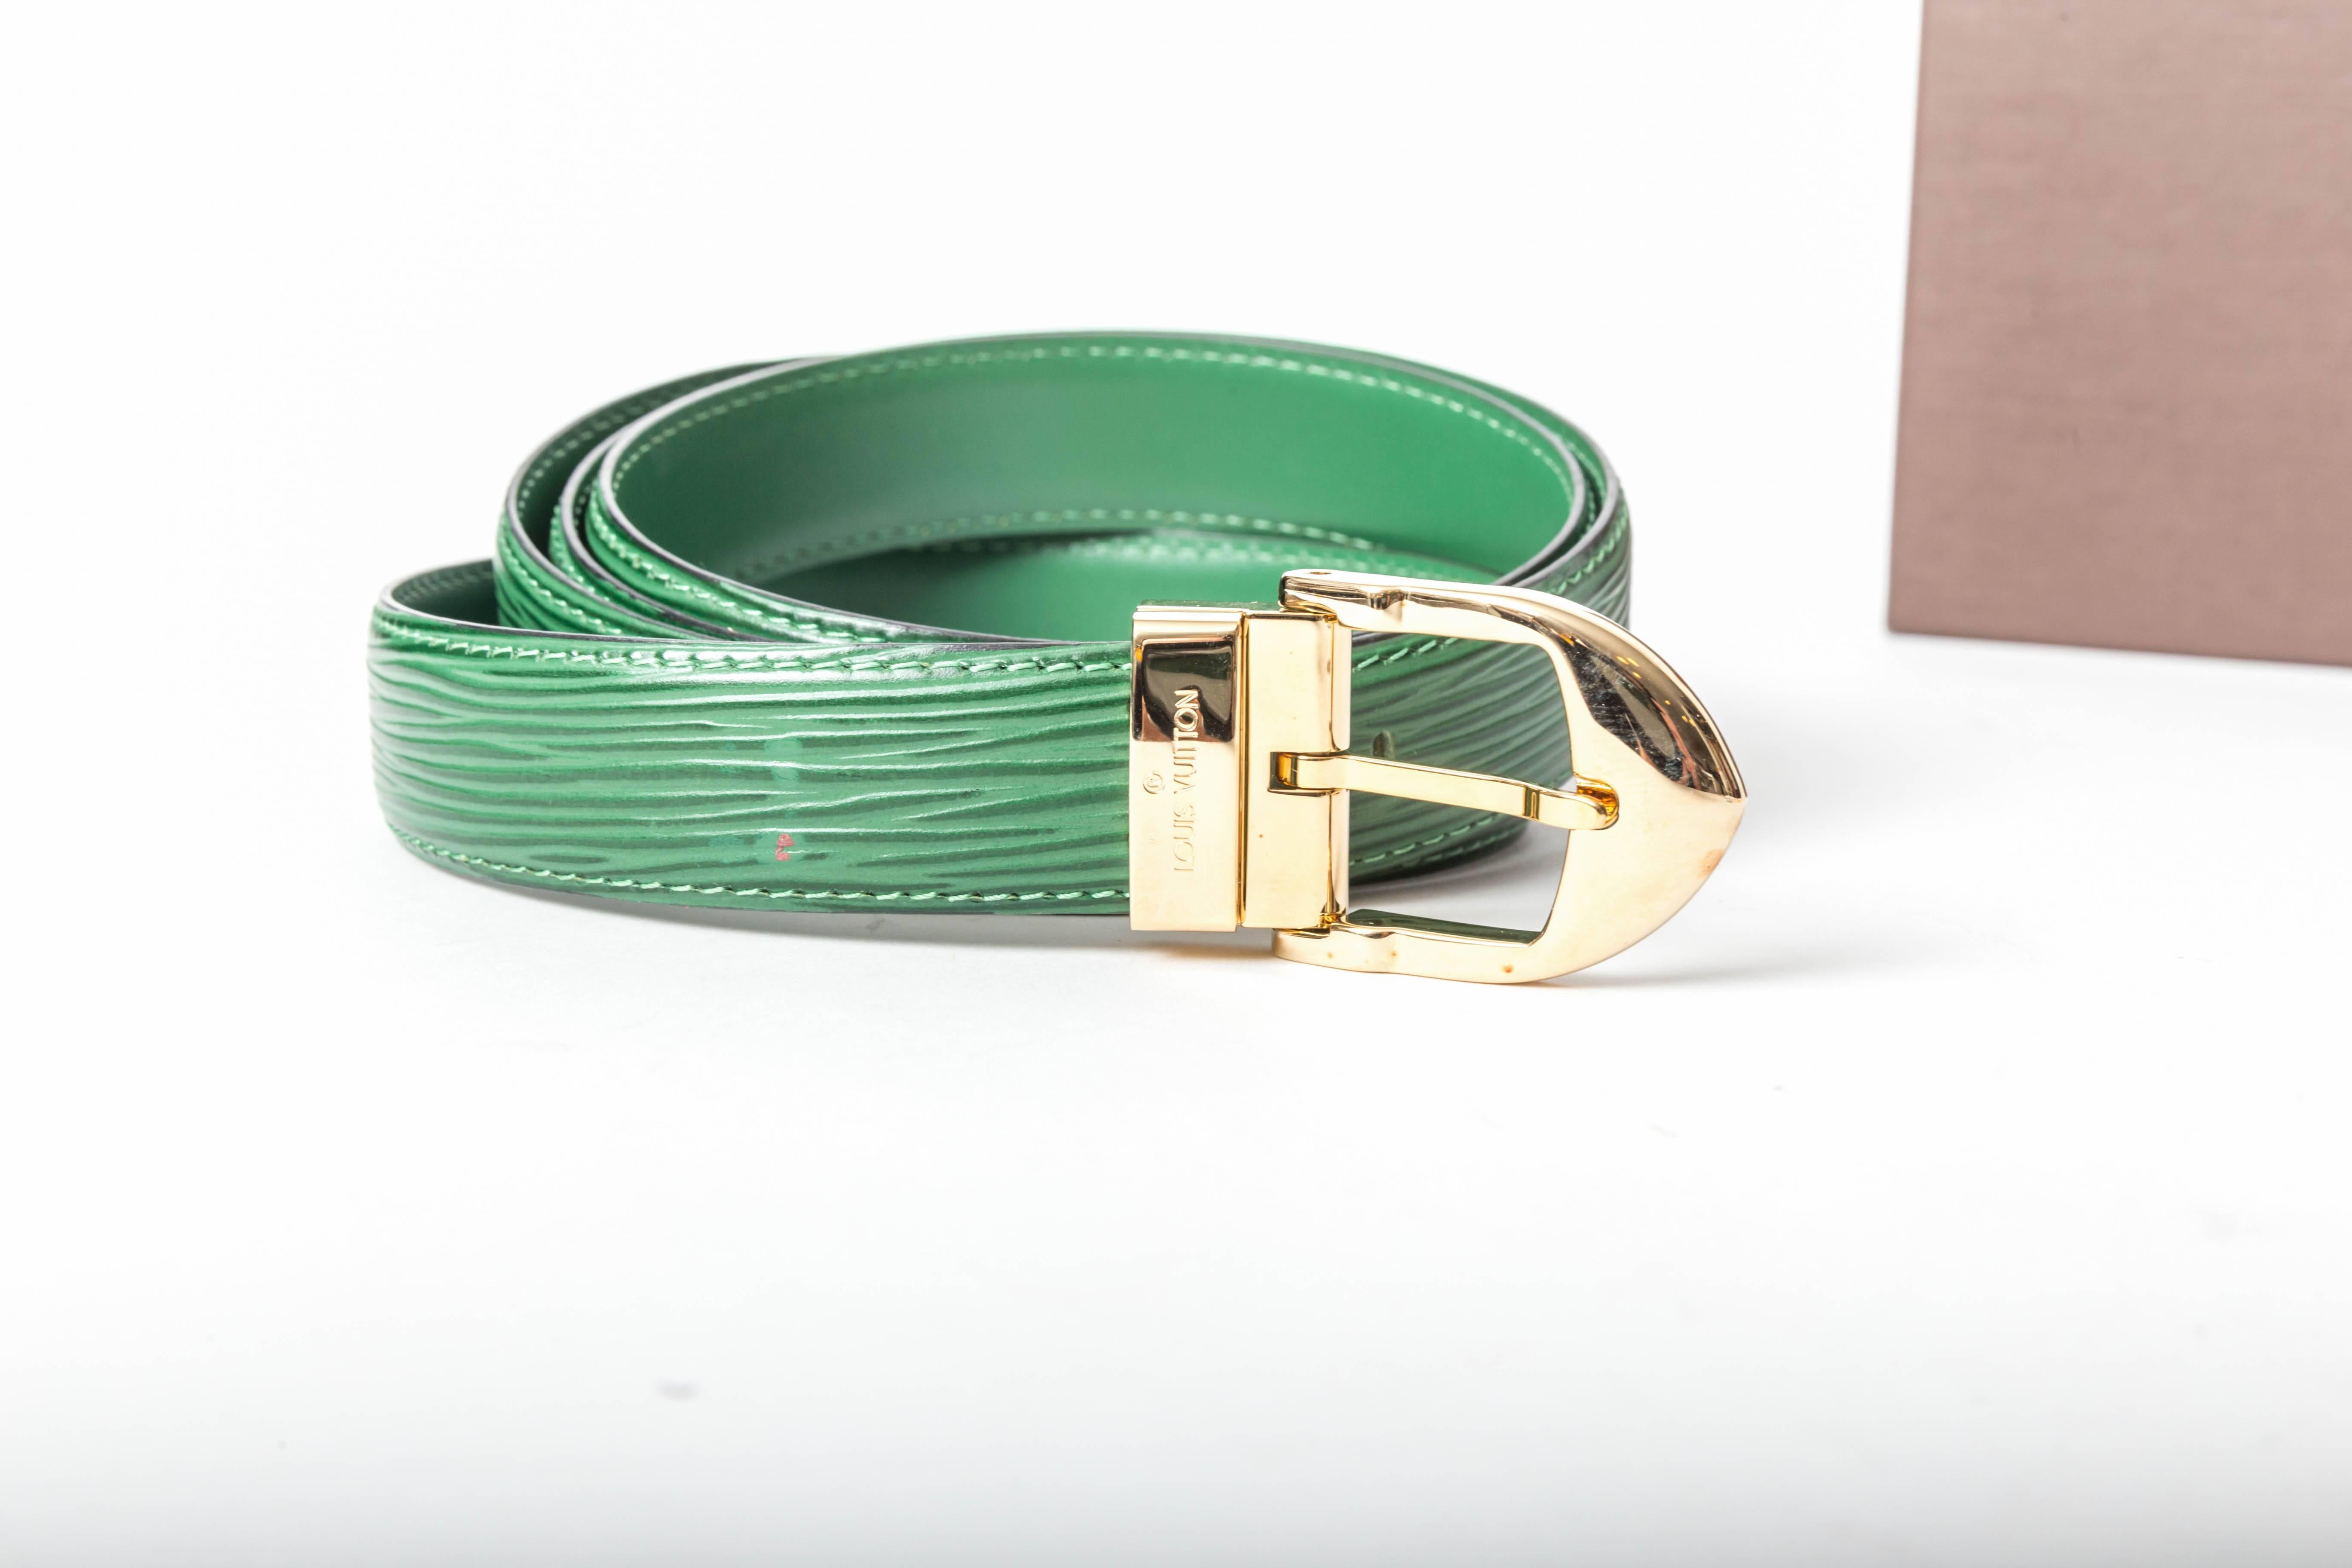 Louis Vuitton Green Epi Belt with Silver and Gold Buckles / New With Box - 44 1